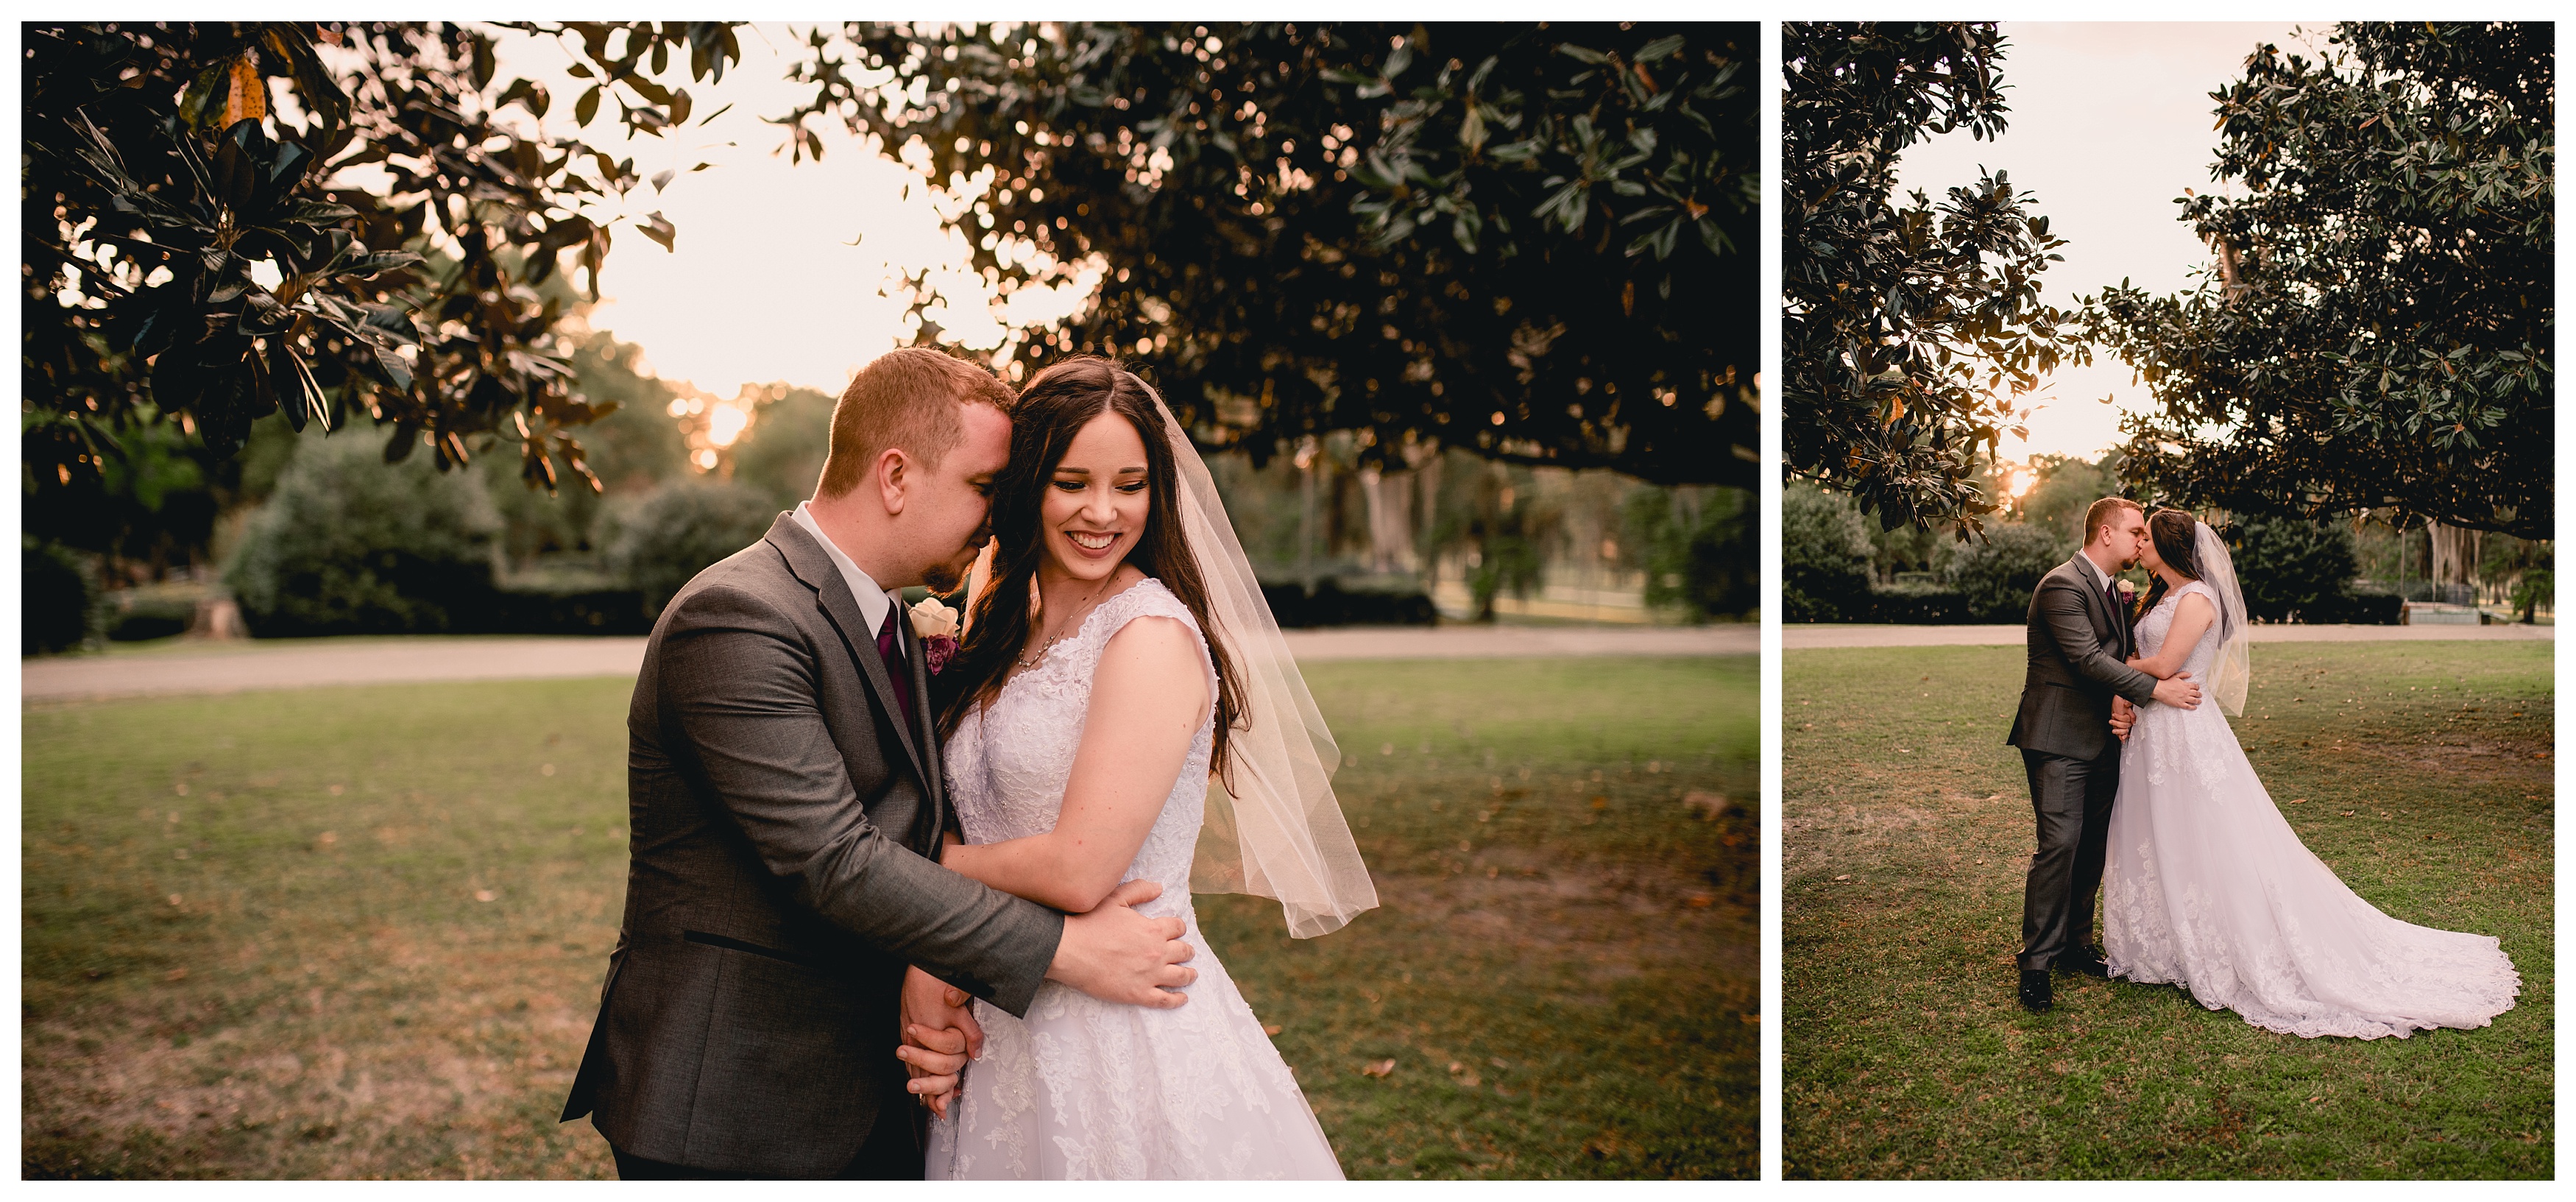 Lifestyle wedding photographer based in North Florida. Shelly Williams Photography